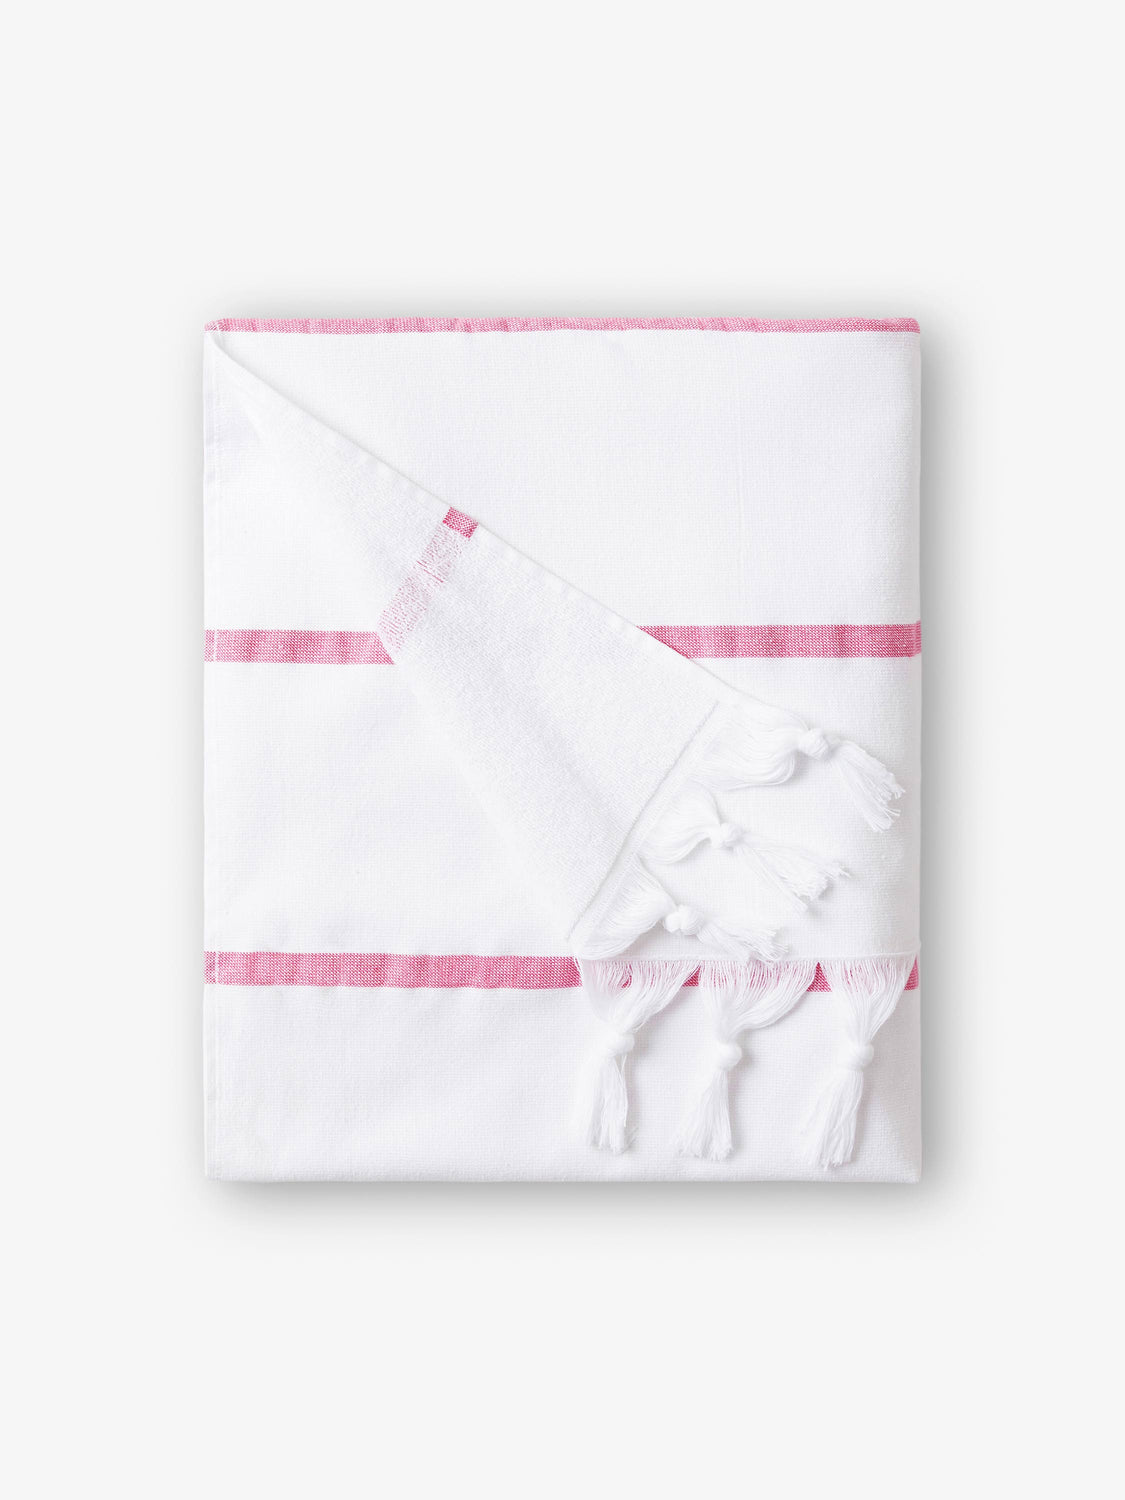 A folded white and pink striped Turkish towel with white fringe.